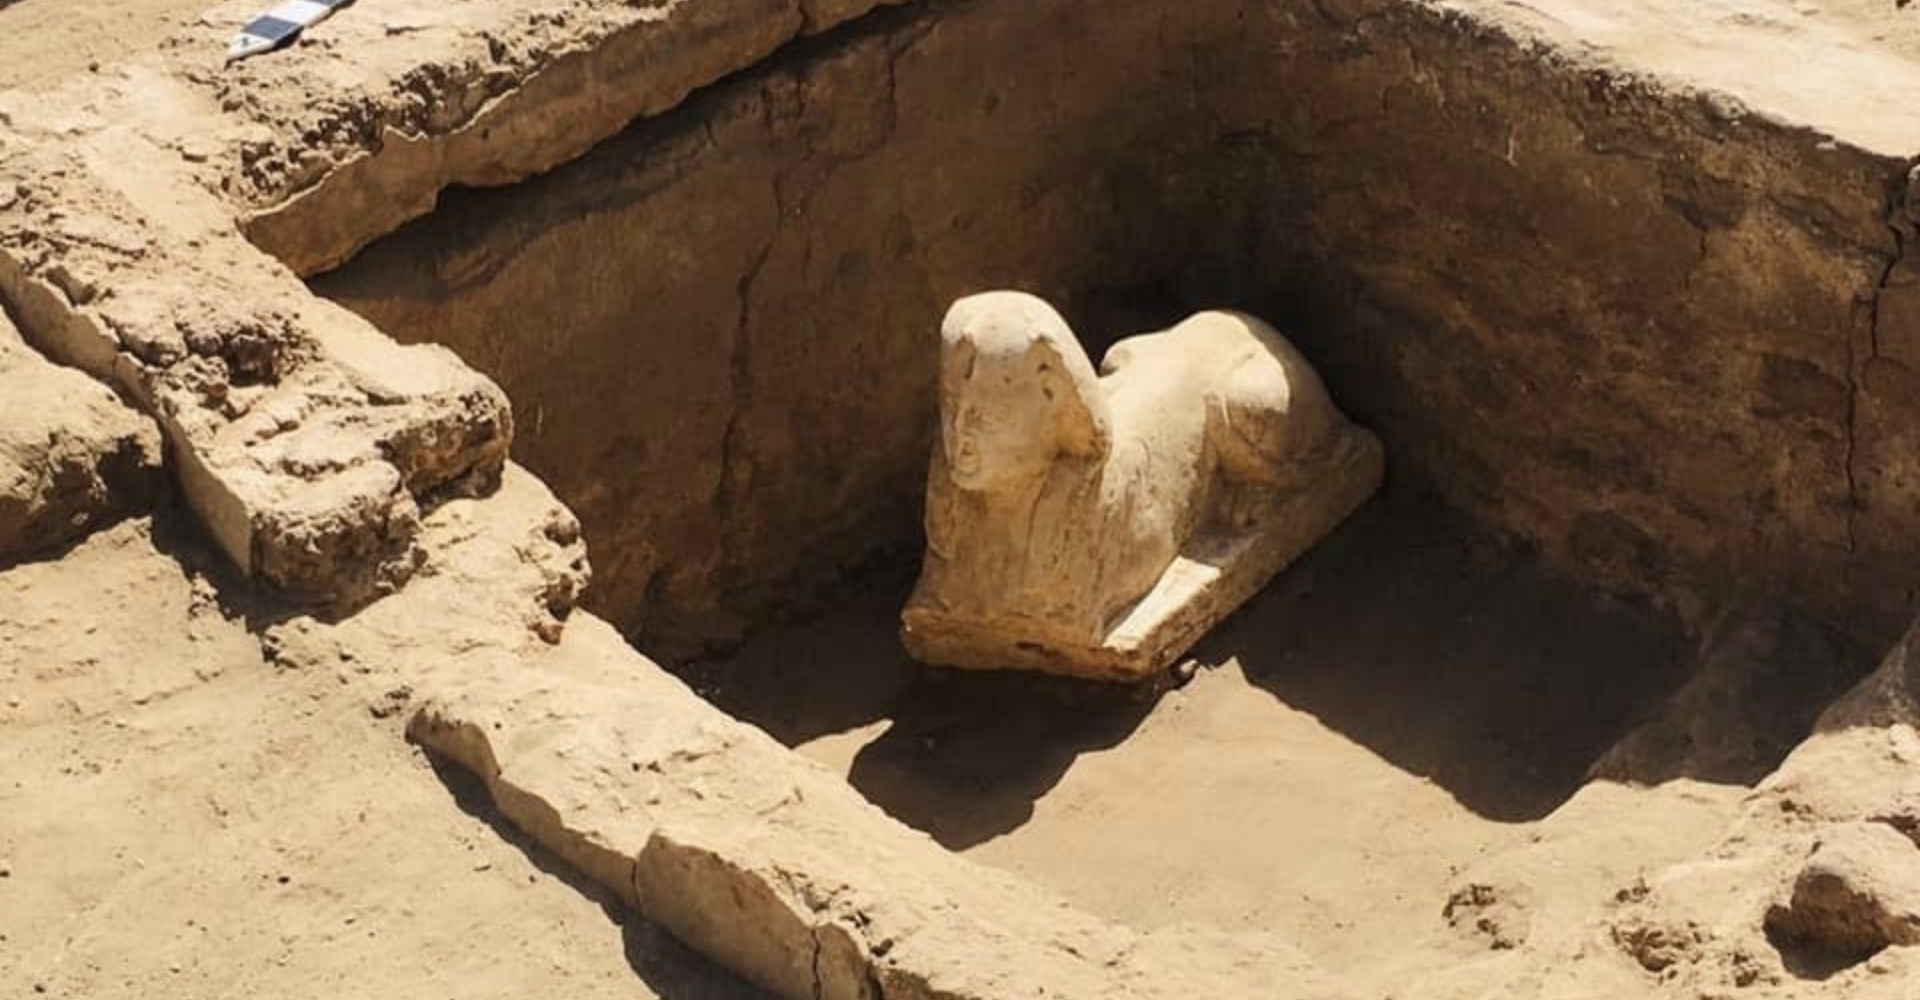 The unearthed Sphinx believed to depict Roman Emperor Claudius. Image Credit: Egyptian Ministry of Antiquities.